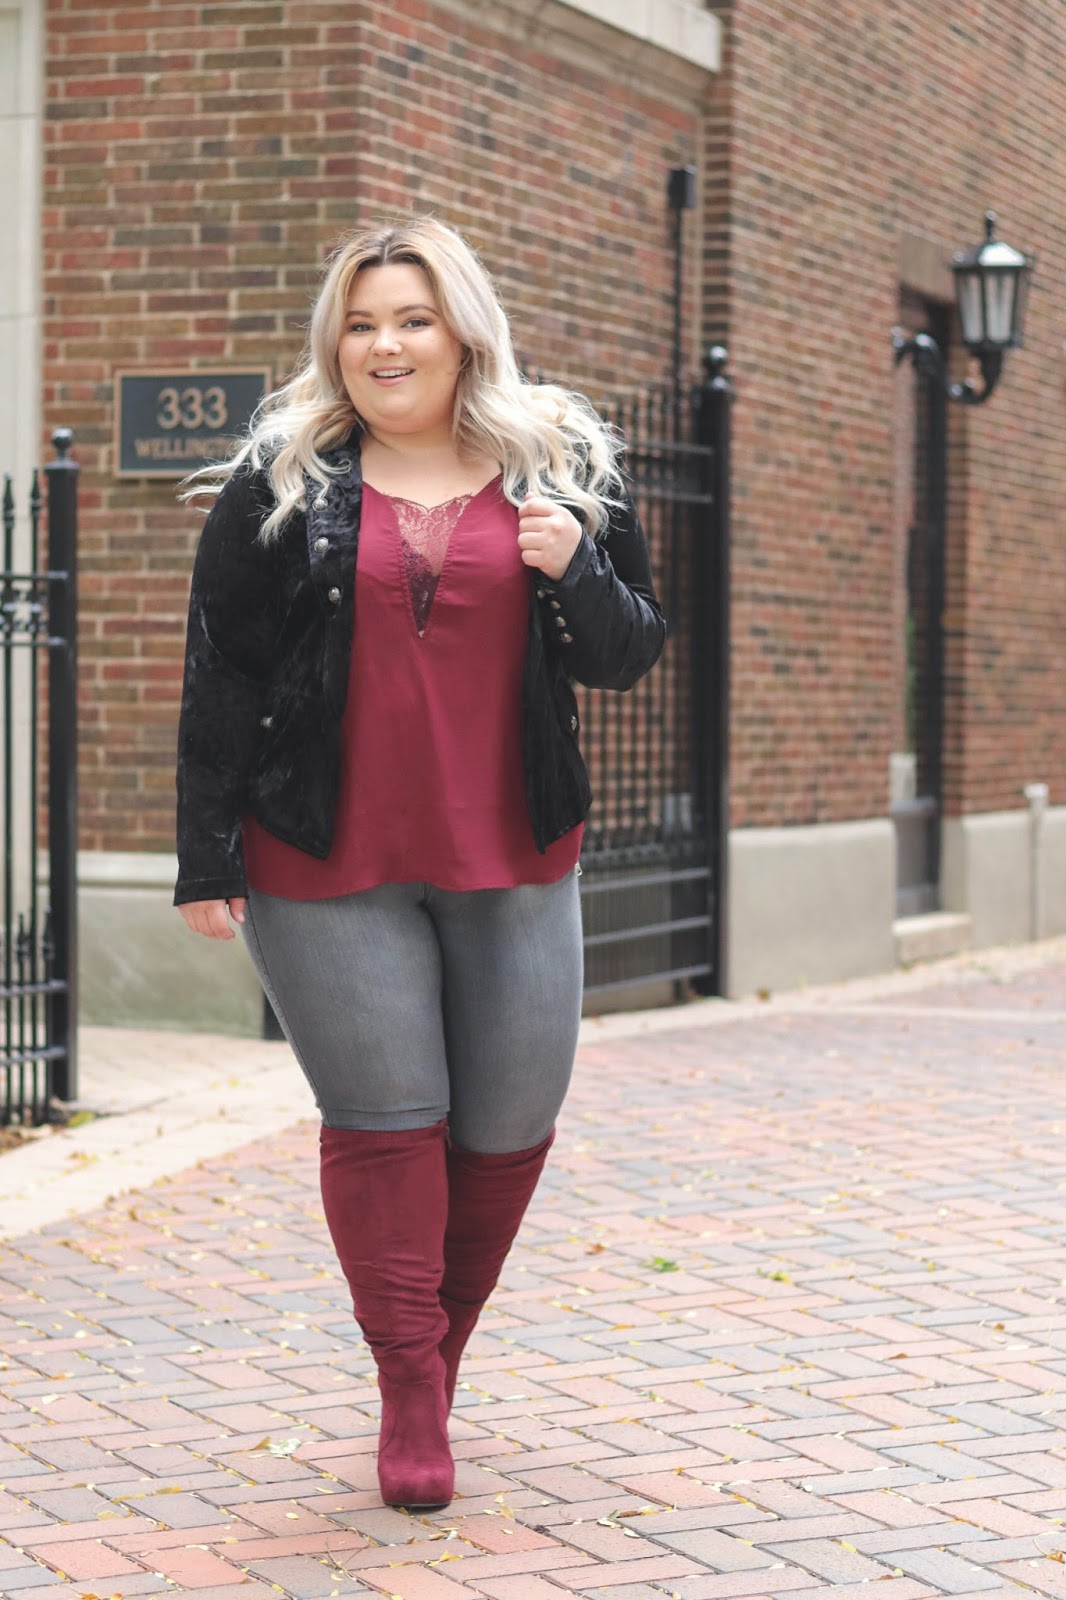 natalie in the city, Natalie Craig, plus size fashion, Chicago model, plus size model, plus size fashion blogger, Chicago fashion blogger, curves and confidence, plus size wide calf boots, wide calf knee high boots, torrid, blogger review, lace tank tops, affordable plus size fashion